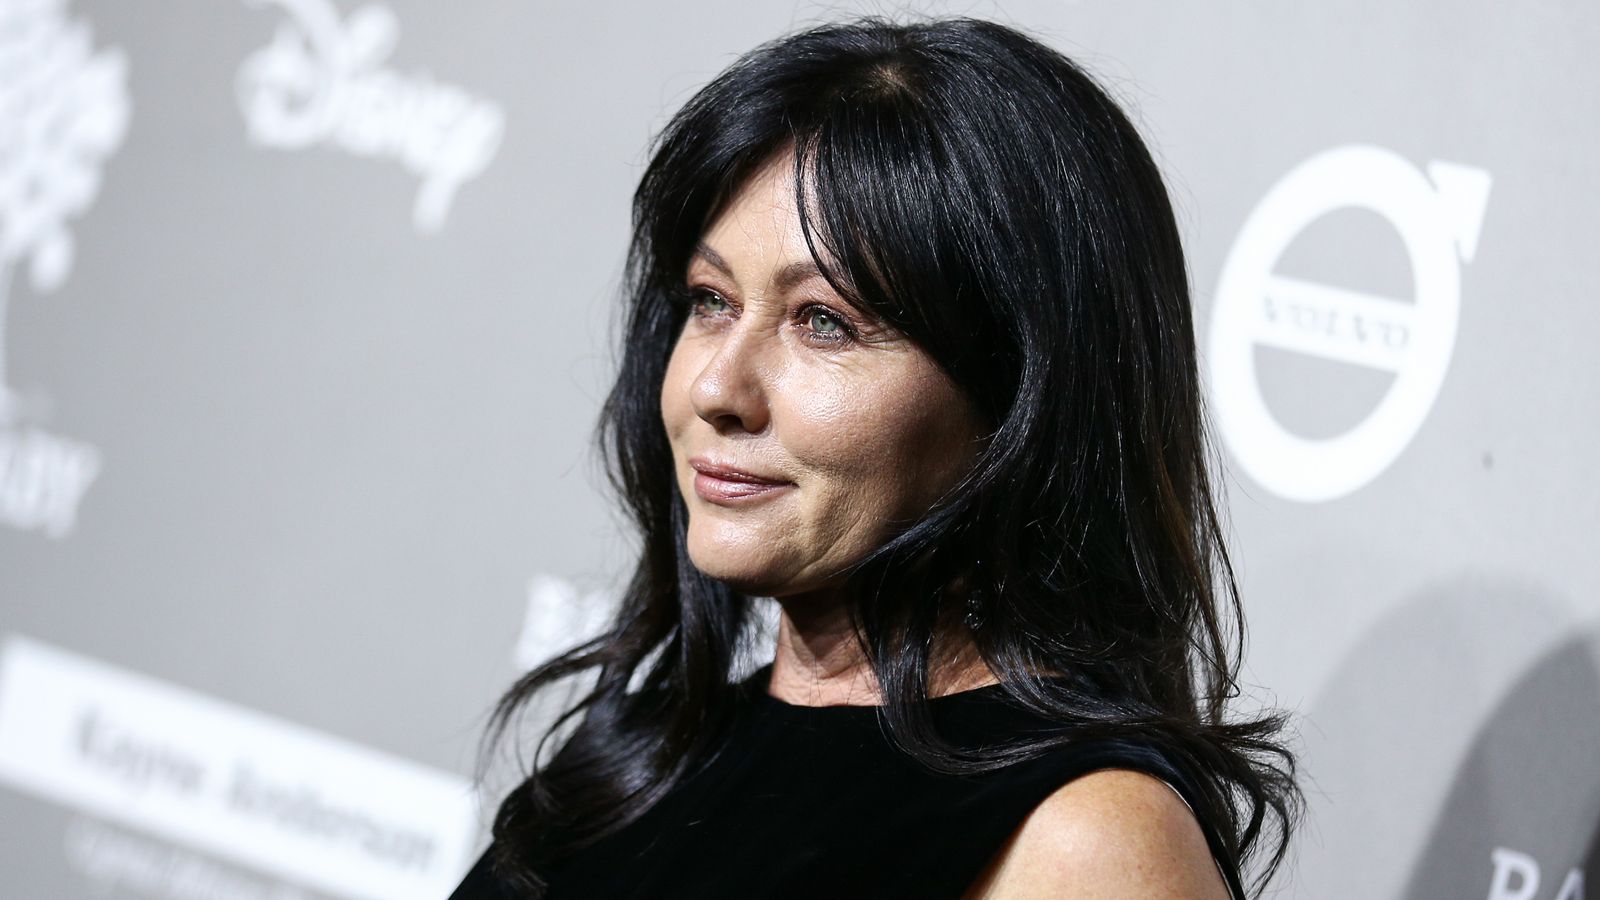 Shannen Doherty, Beverly Hills 90210 star, reveals cancer has spread to her brain 